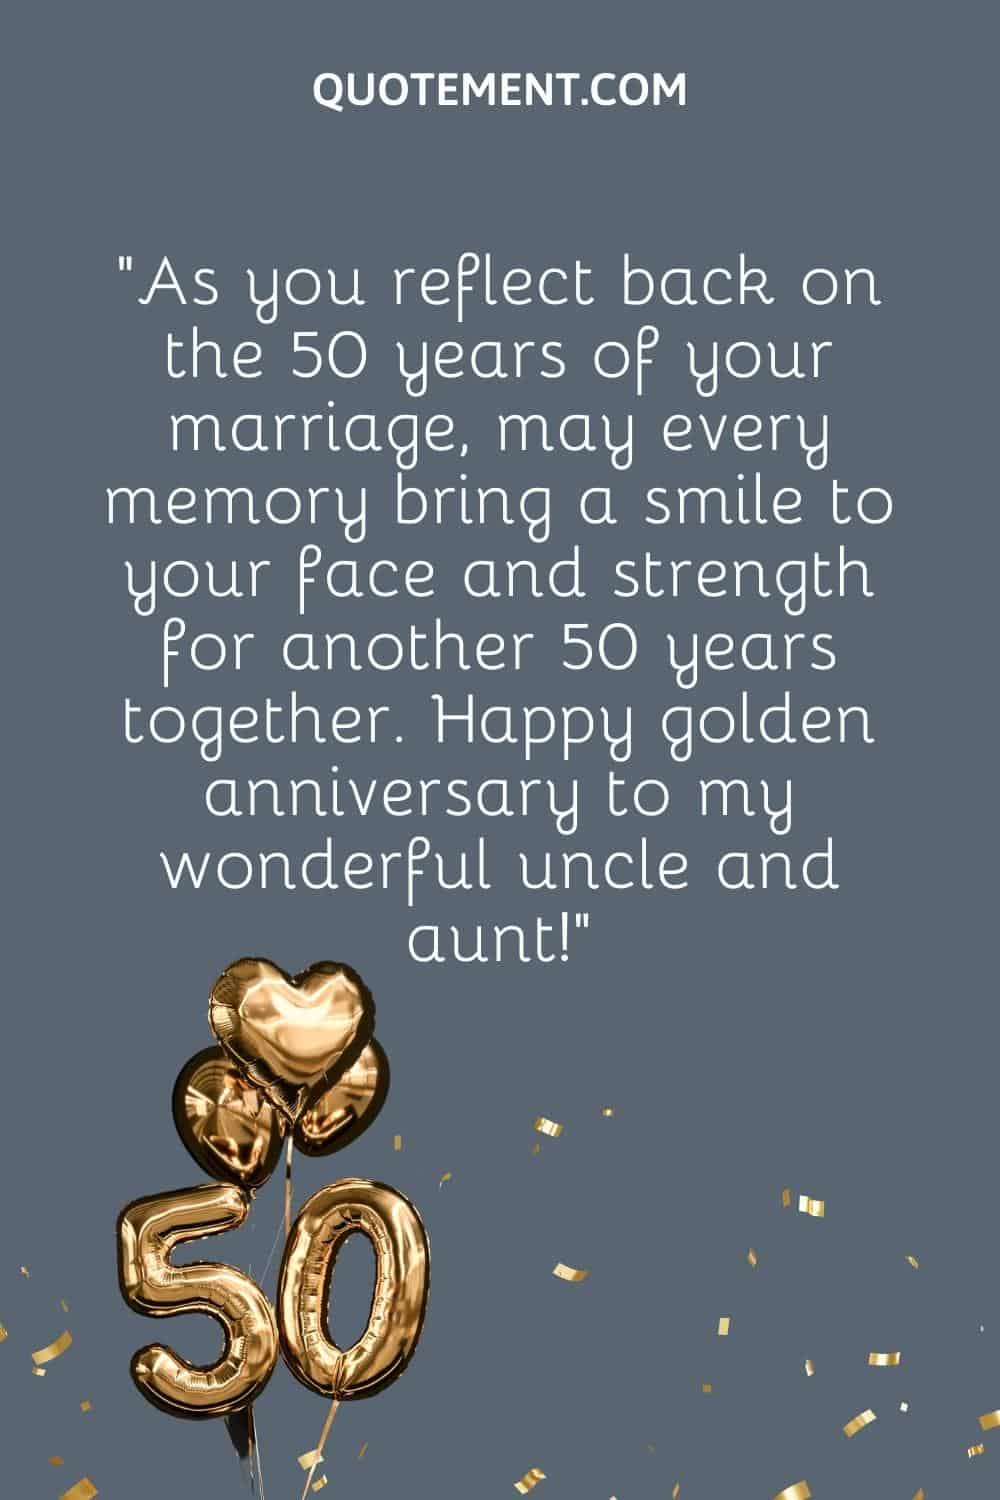 “As you reflect back on the 50 years of your marriage, may every memory bring a smile to your face and strength for another 50 years together. Happy golden anniversary to my wonderful uncle and aunt!”